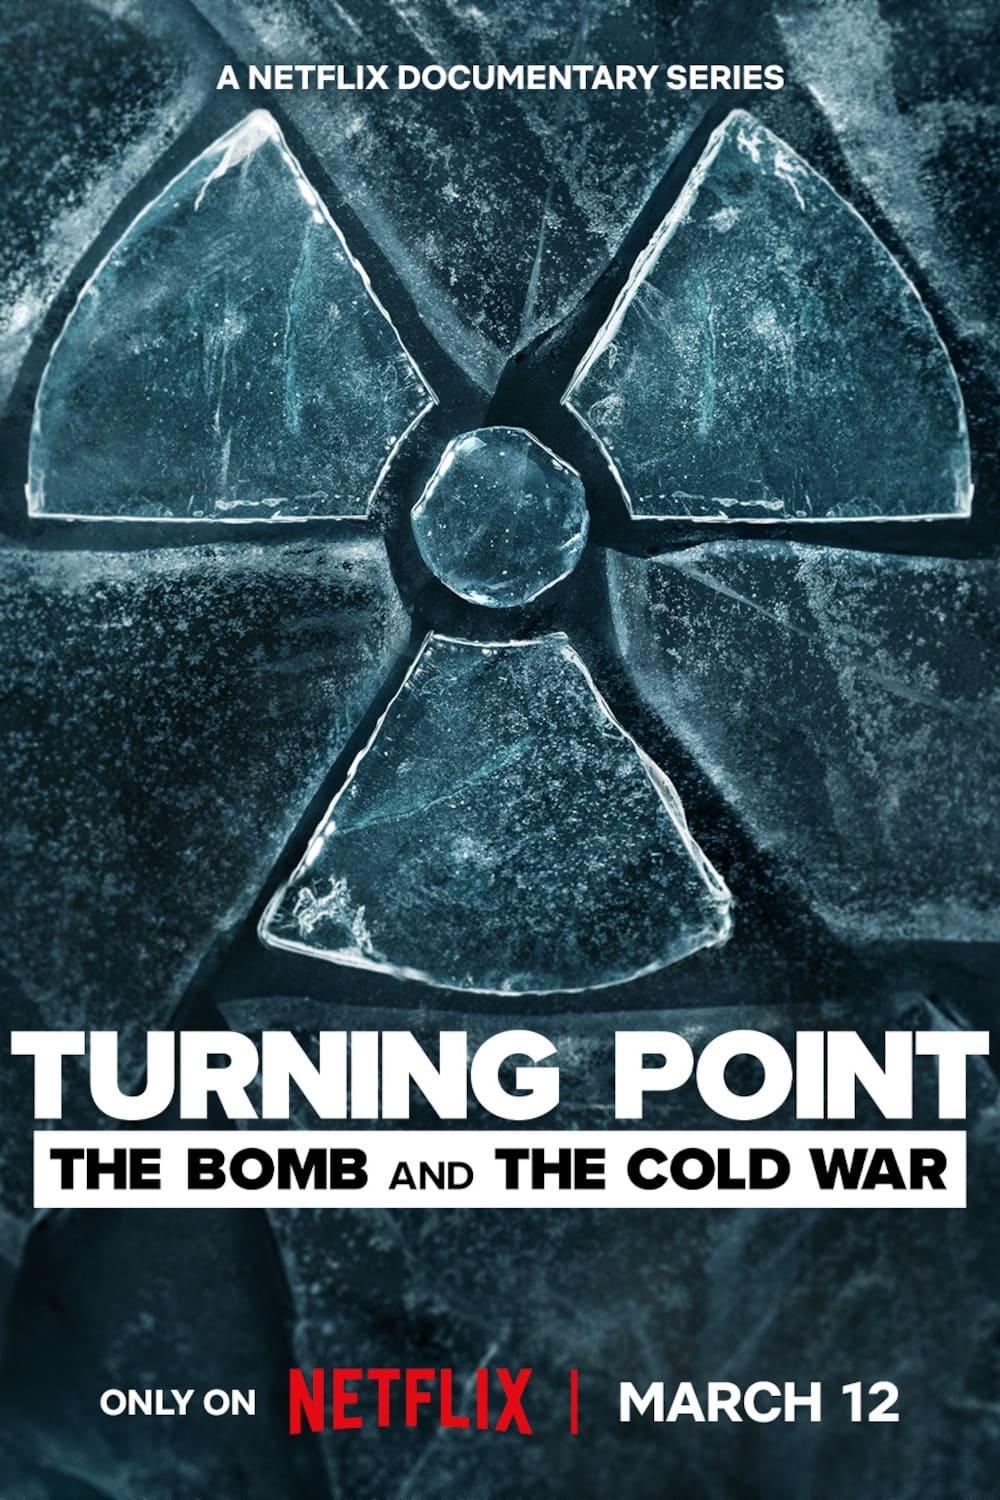 Turning Point: The Bomb and the Cold War poster